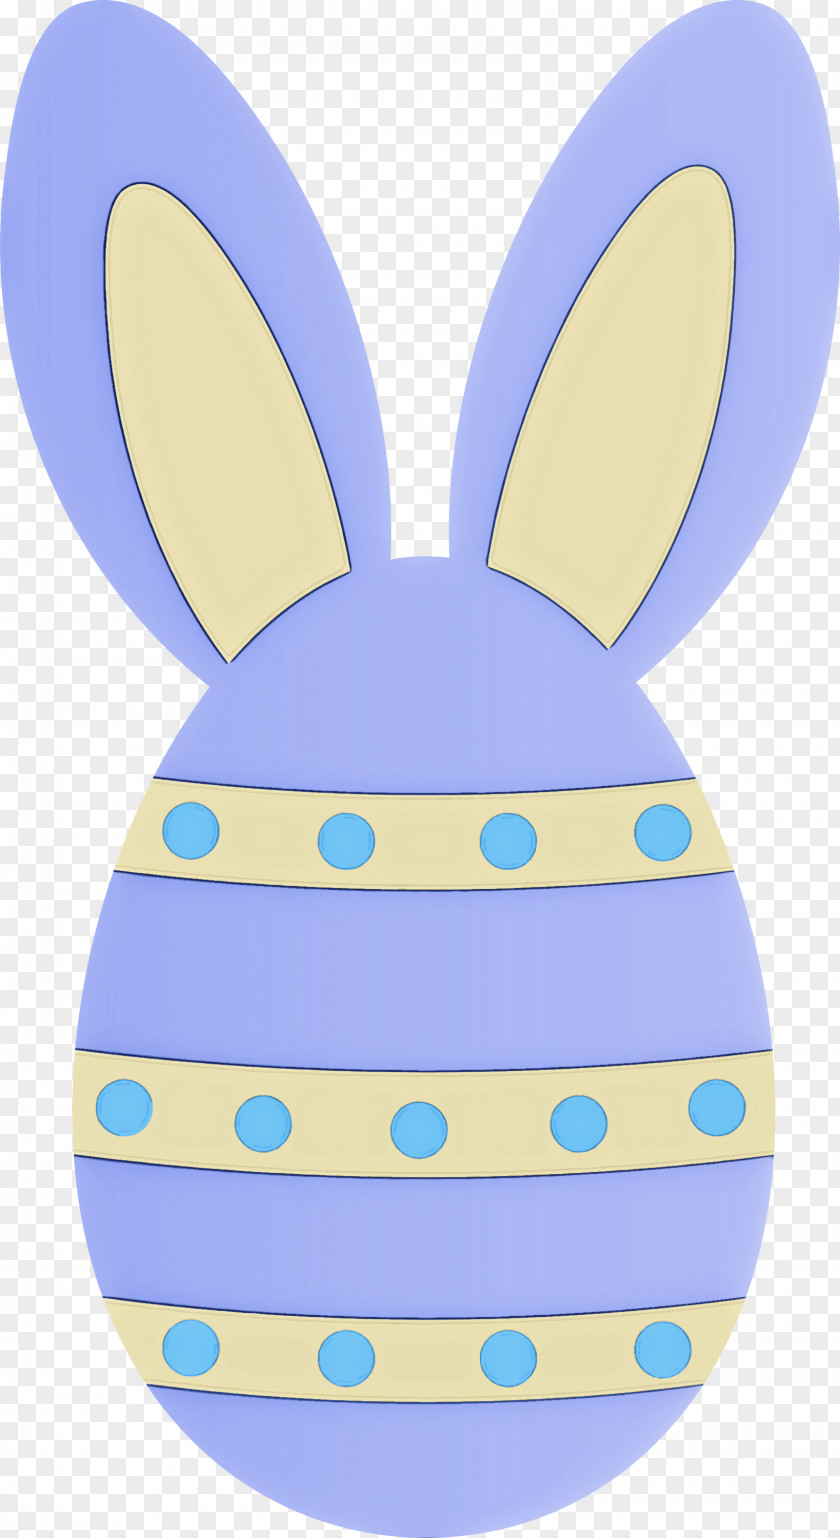 Easter Egg With Bunny Ears PNG